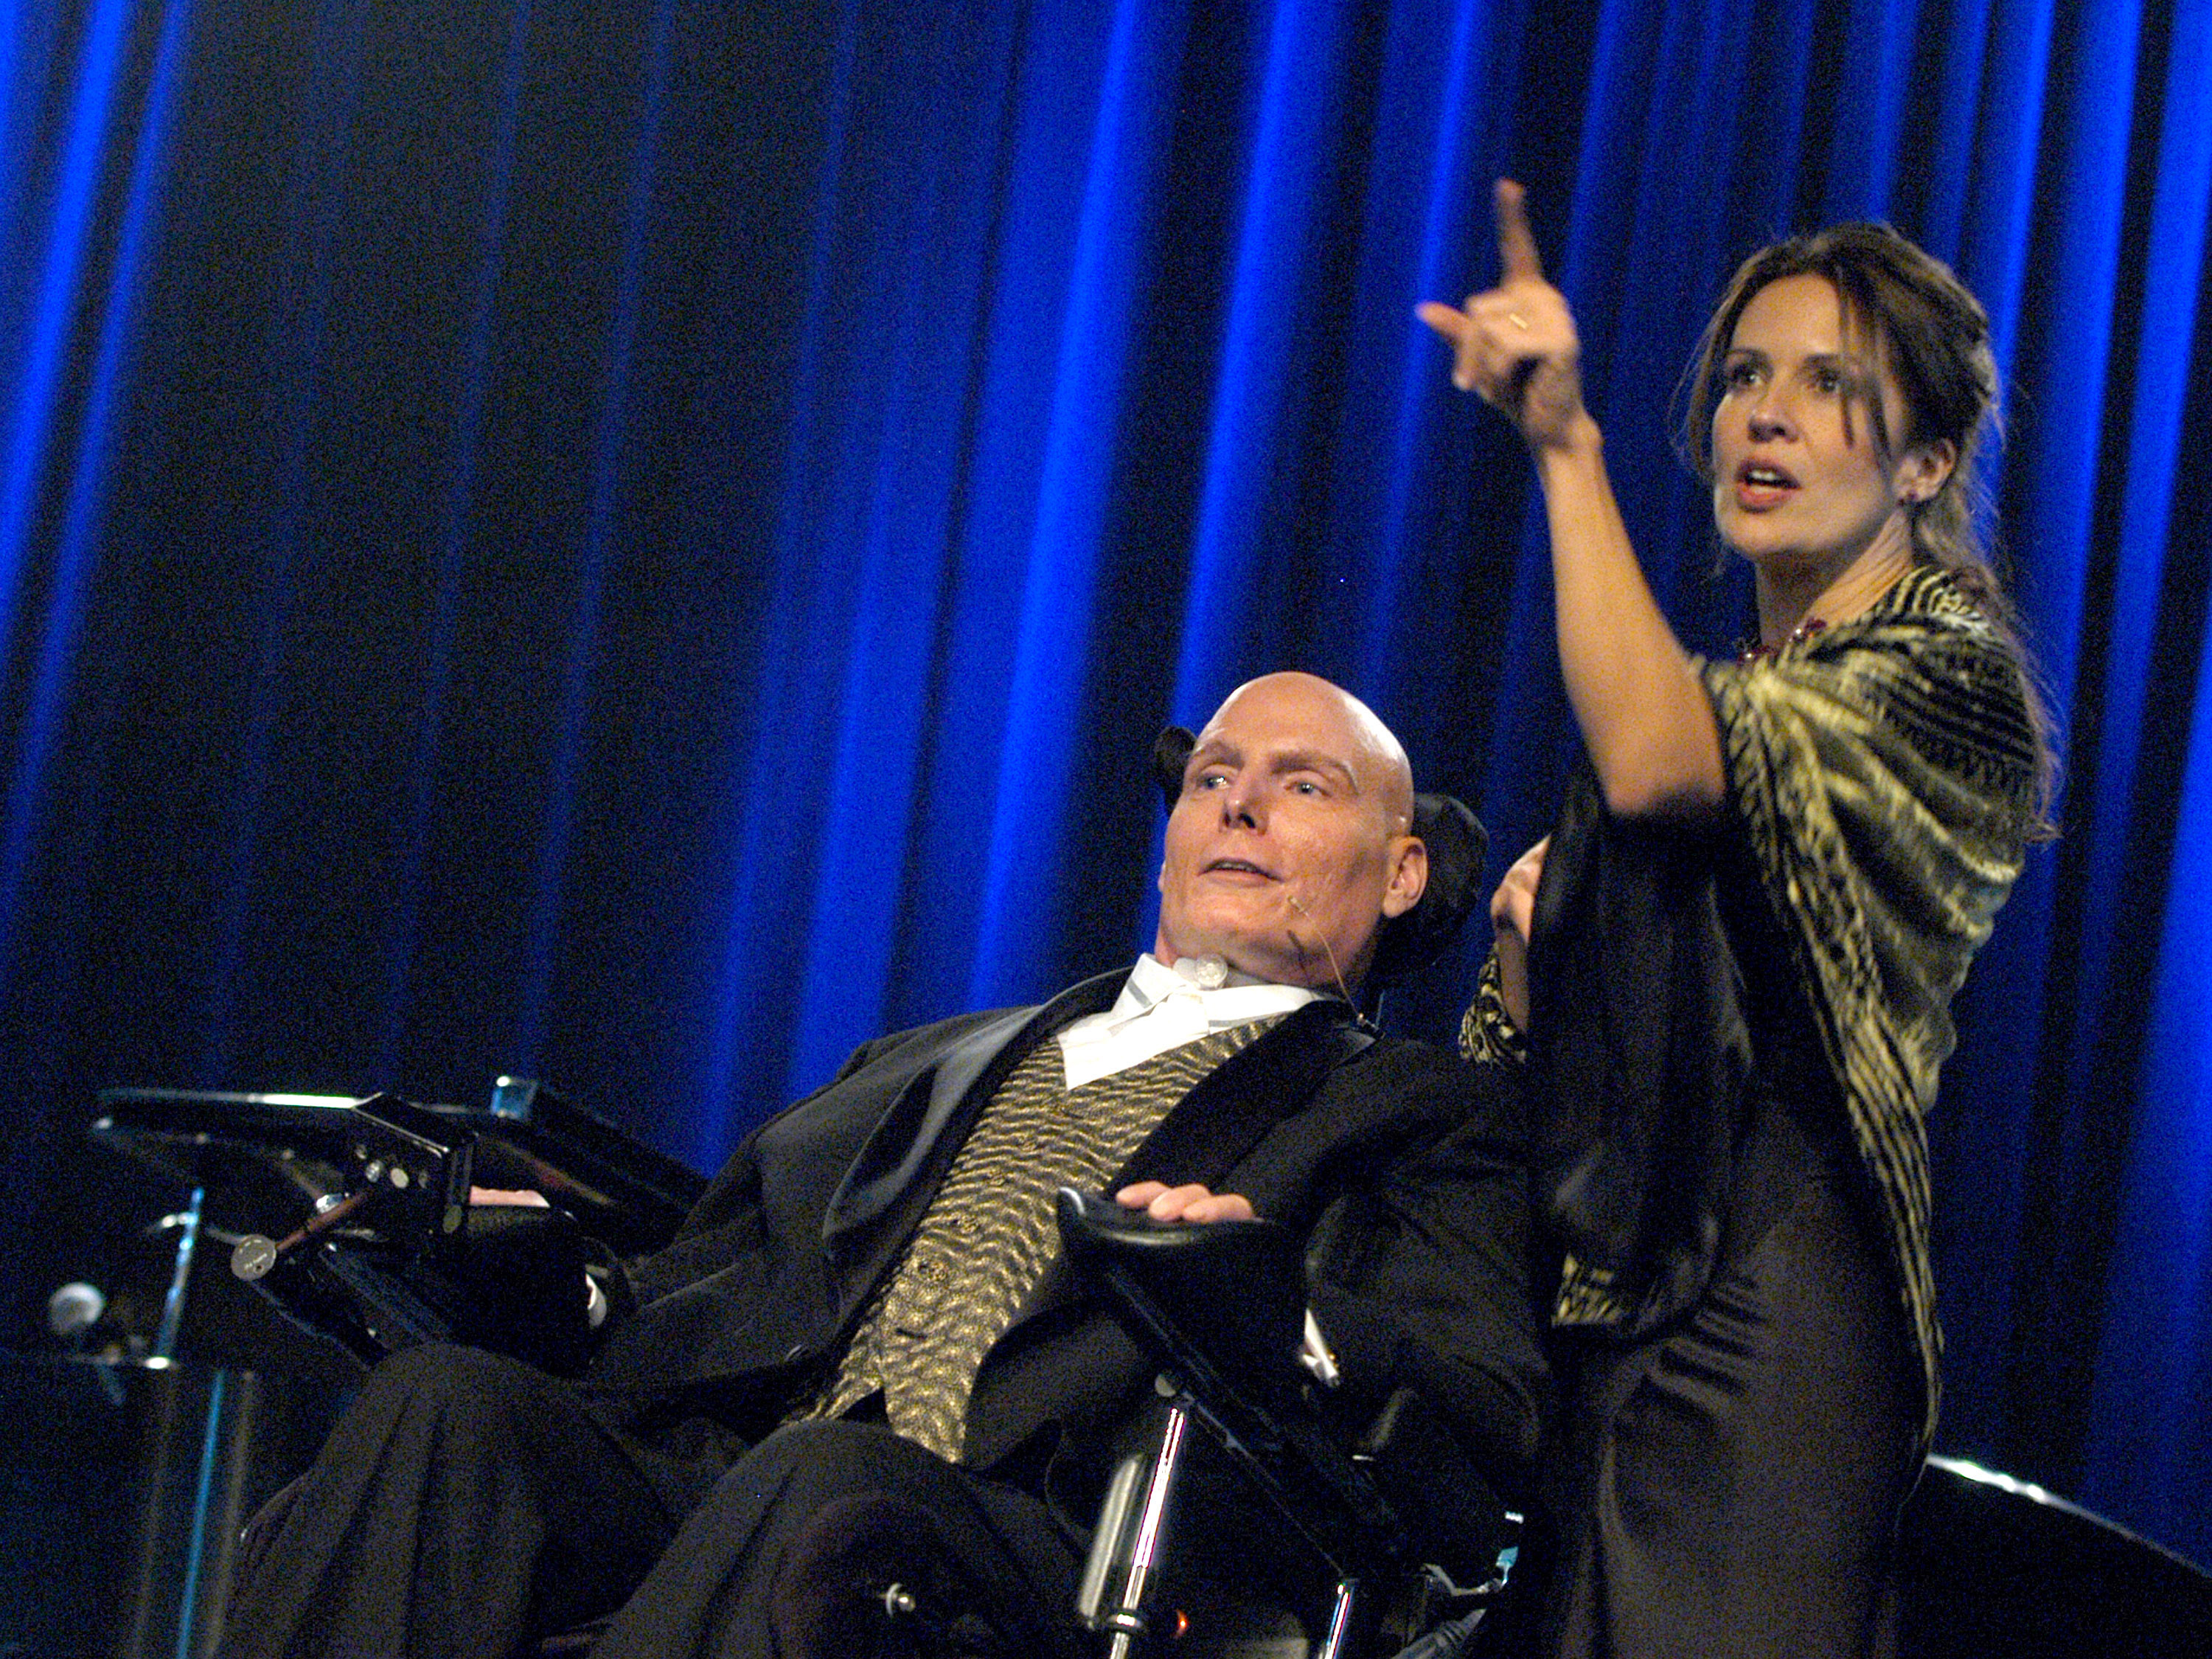 Christopher Reeve and Dana Reeve during 13th Annual "A Magical Evening" Gala Hosted by The Christopher Reeve Paralysis Foundation - Inside at Marriot Marquis in New York City, New York | Source: Getty Images